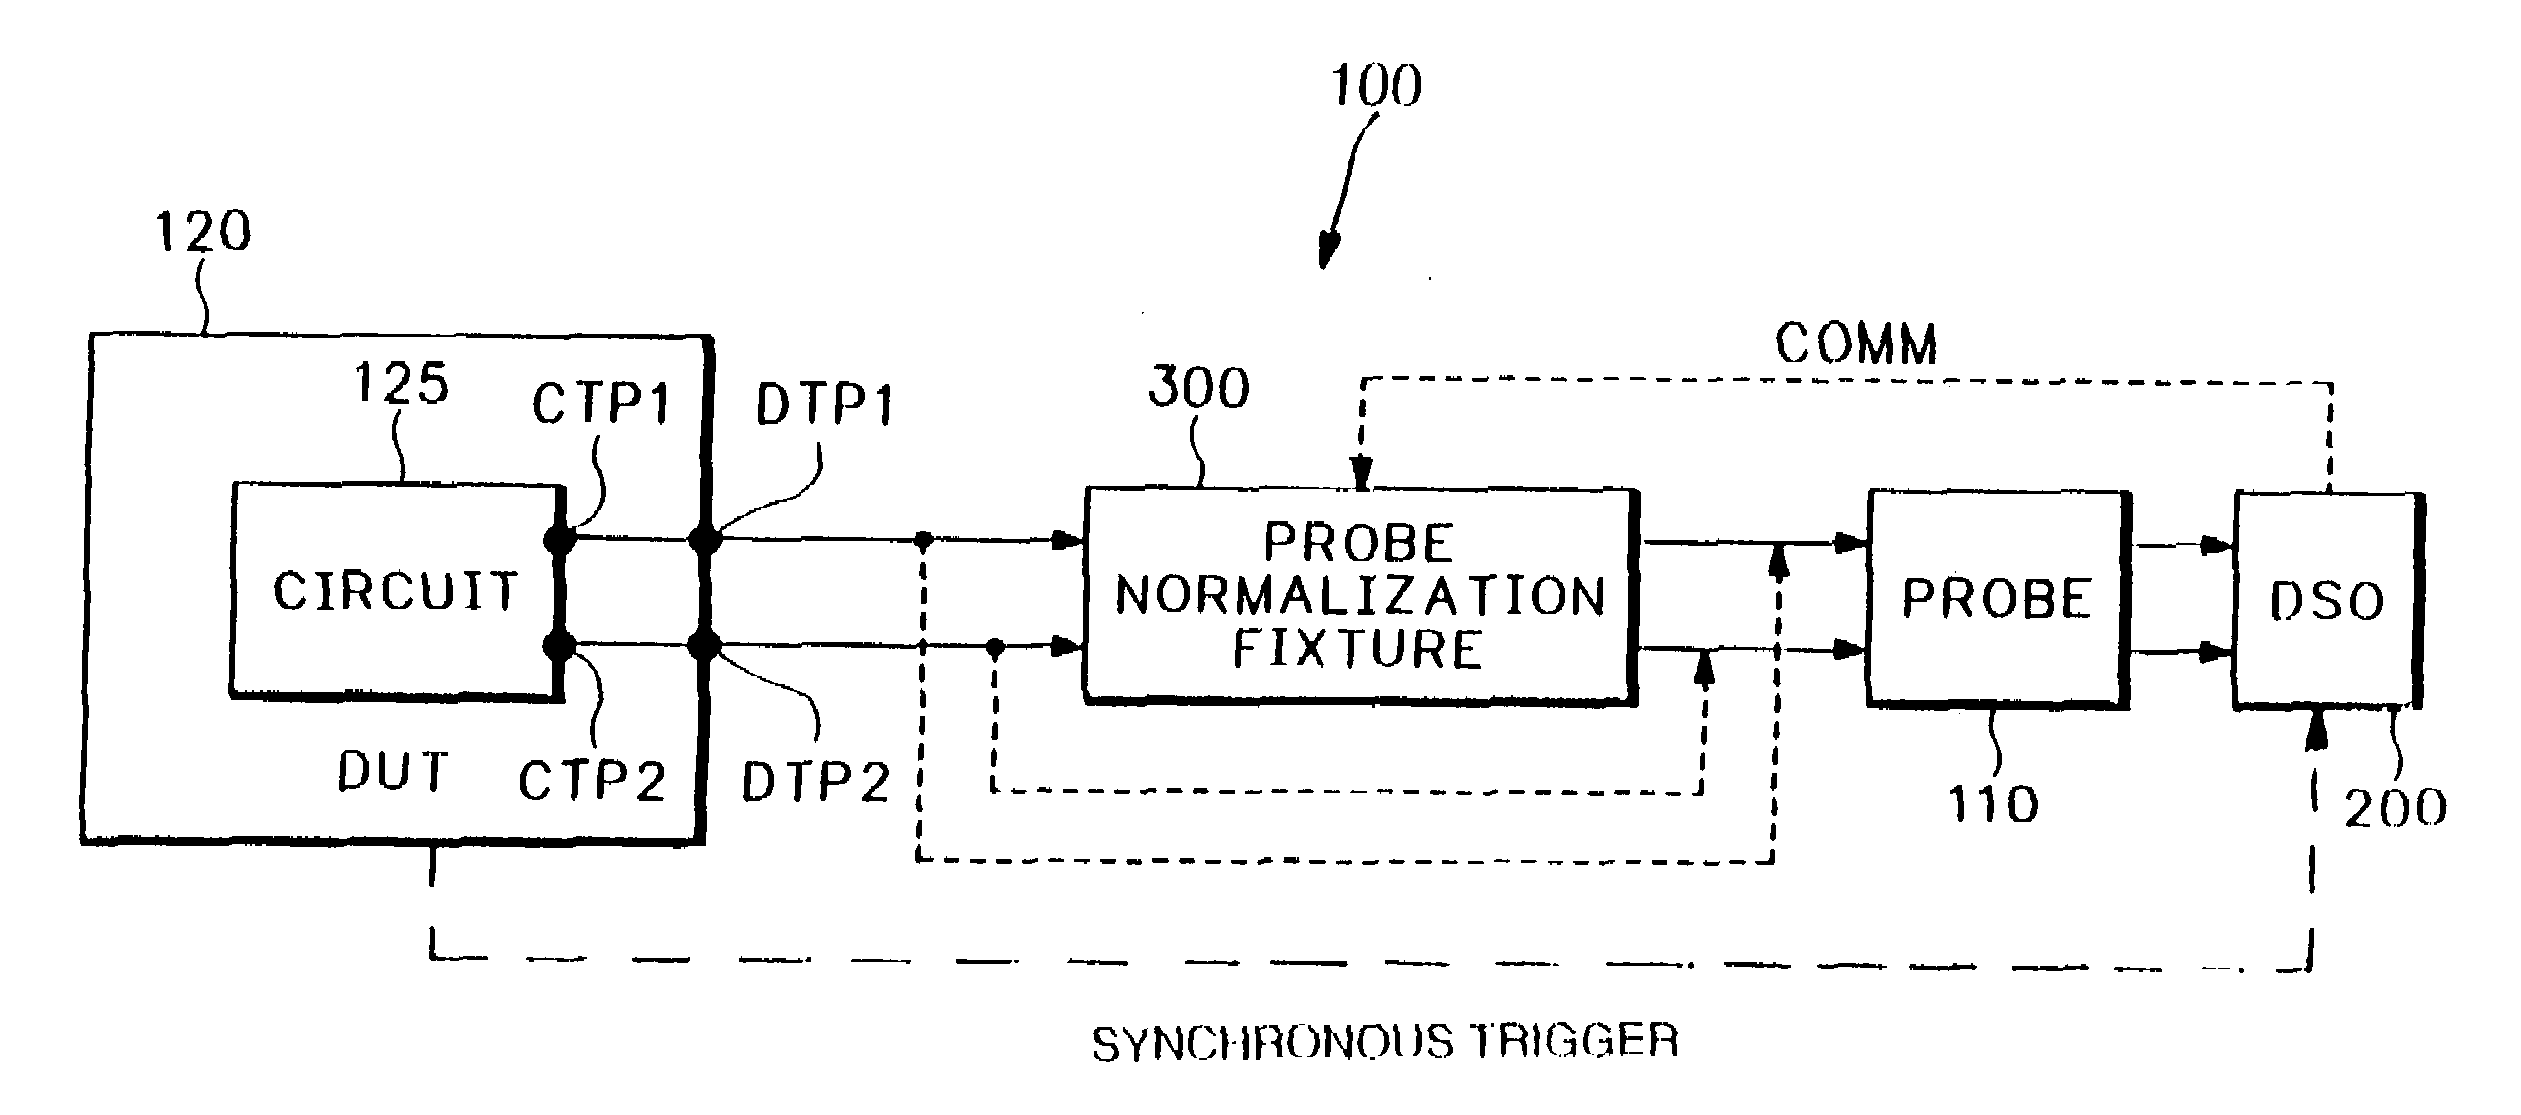 Signal analysis system and calibration method for measuring the impedance of a device under test